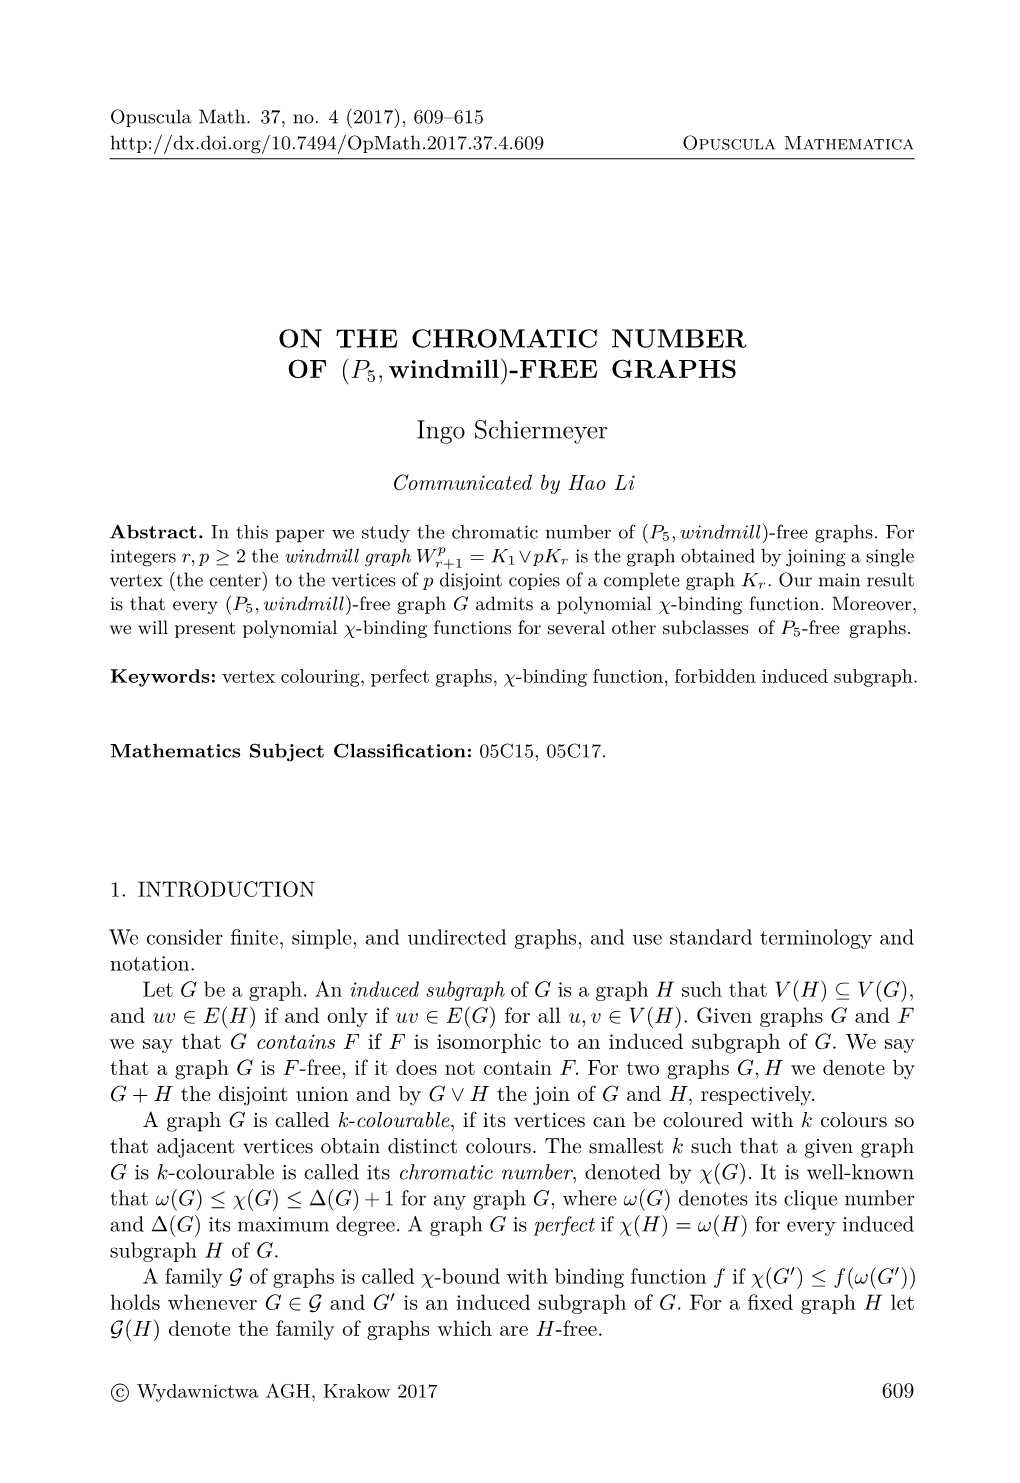 ON the CHROMATIC NUMBER of (P5,Windmill)-FREE GRAPHS Ingo